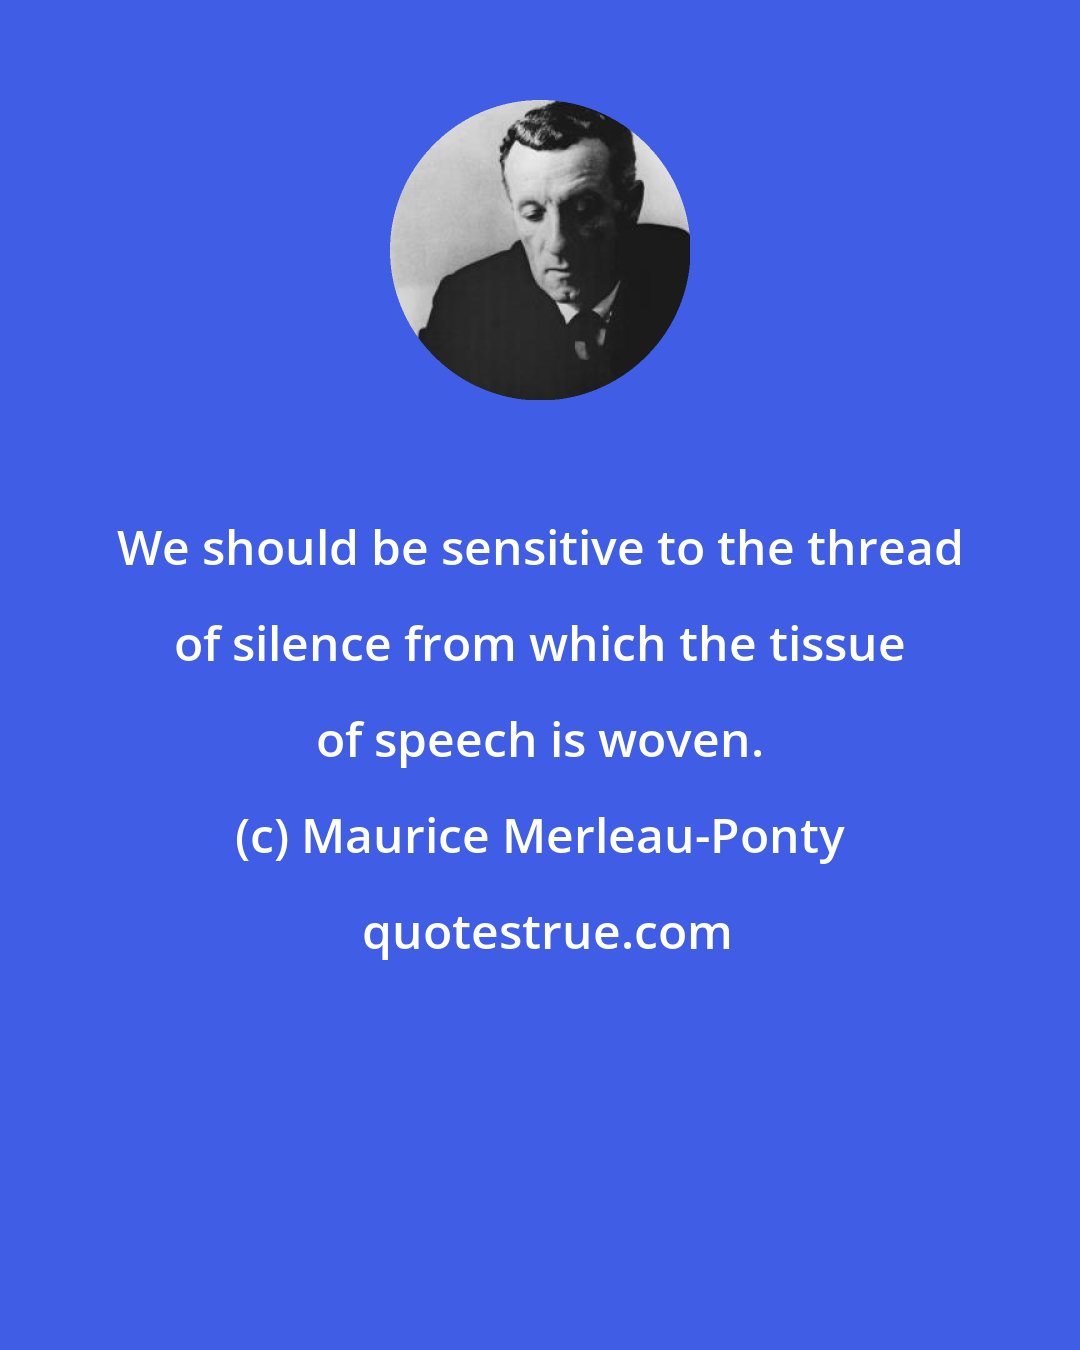 Maurice Merleau-Ponty: We should be sensitive to the thread of silence from which the tissue of speech is woven.